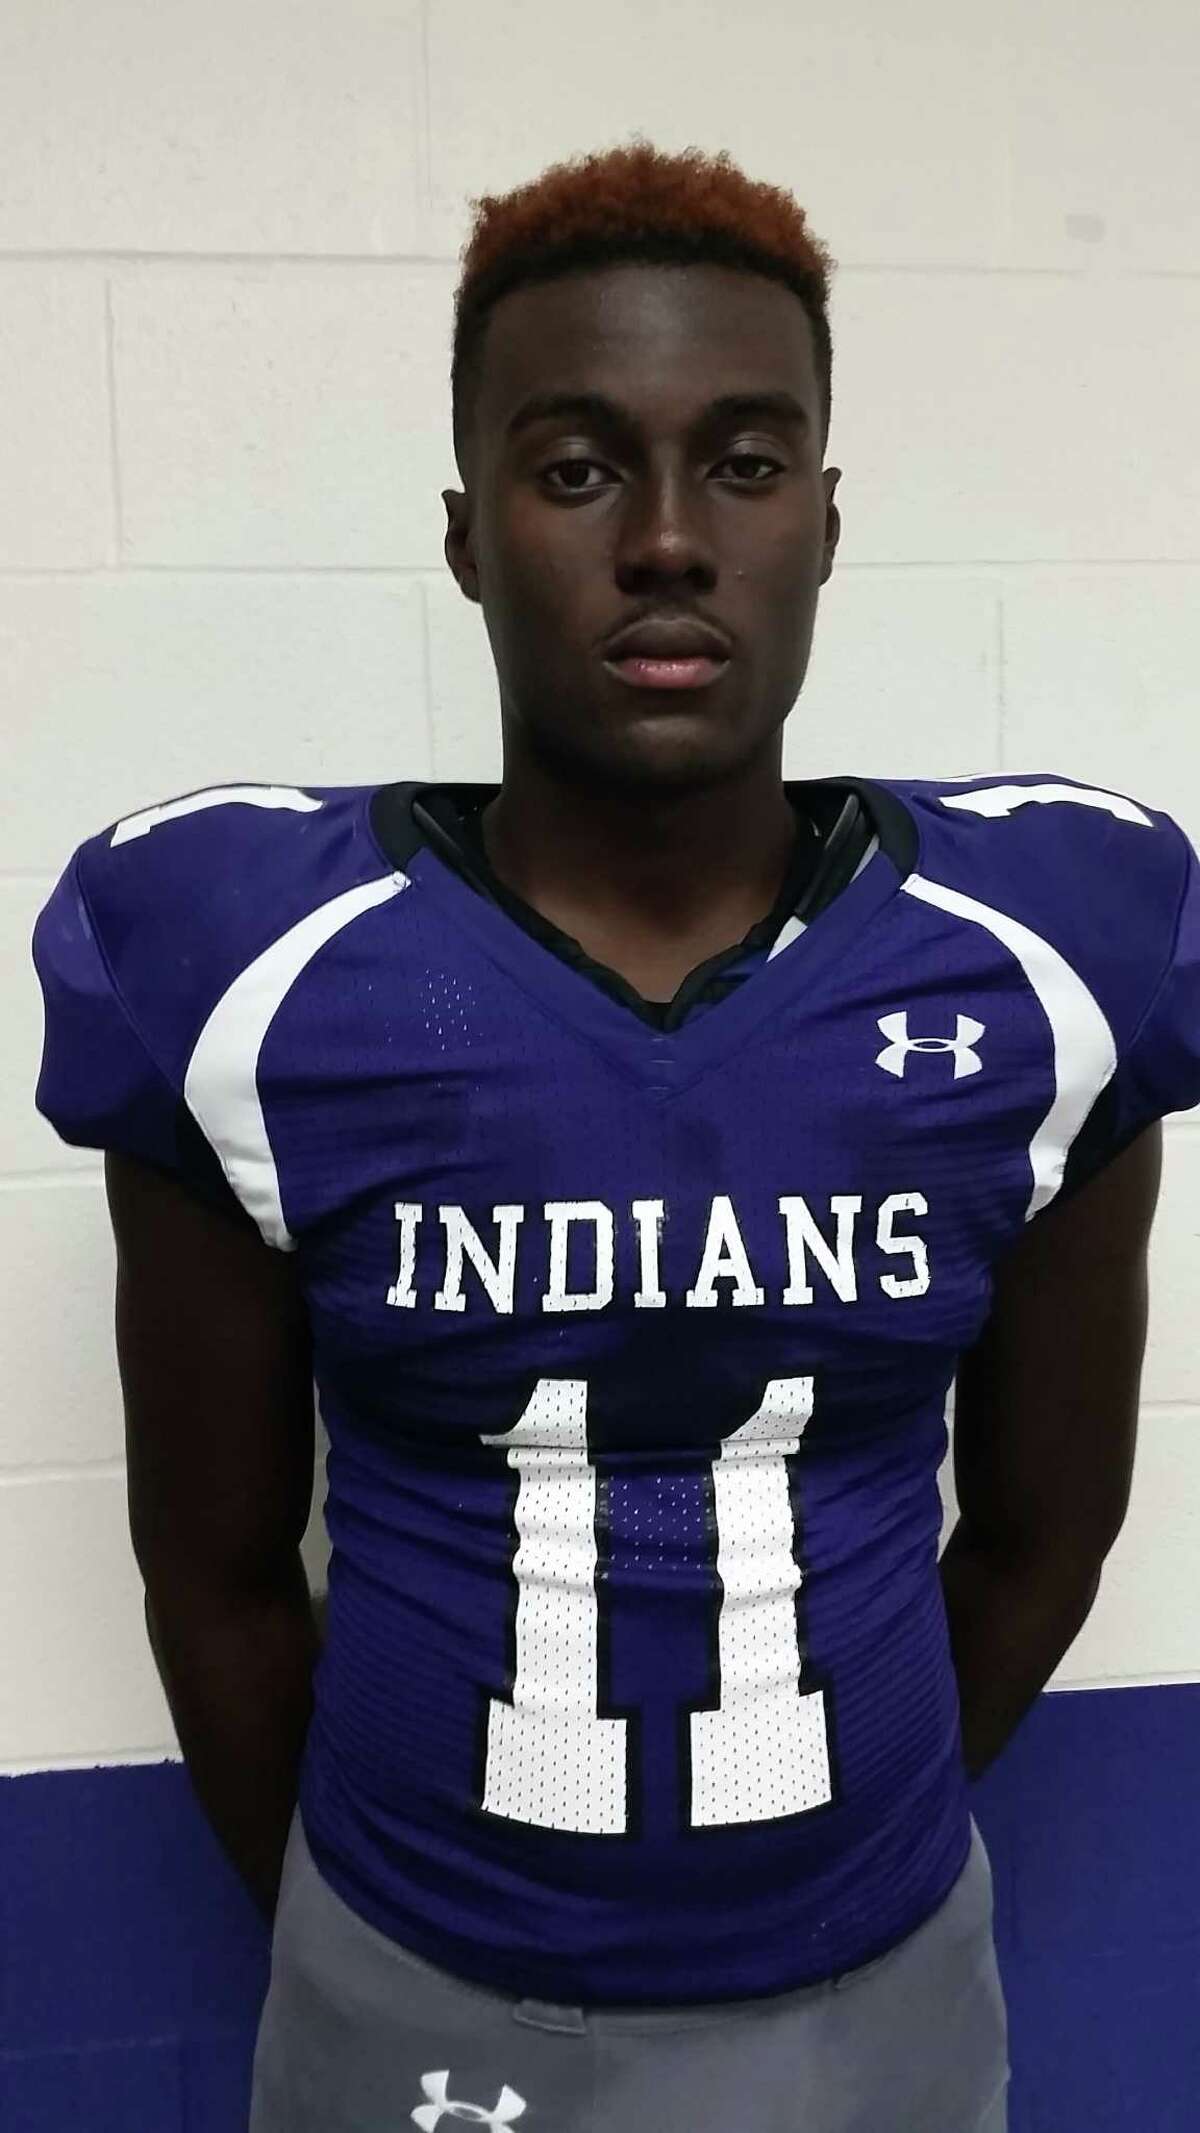 Keynel McZeal, Port Neches-Groves Position: WR Height: 6-3 Weight: 205 pounds Grade: Junior The talented athletic junior burst on the scene his sophomore year by hauling in 32 receptions for 396 yards and 5 TD’s.